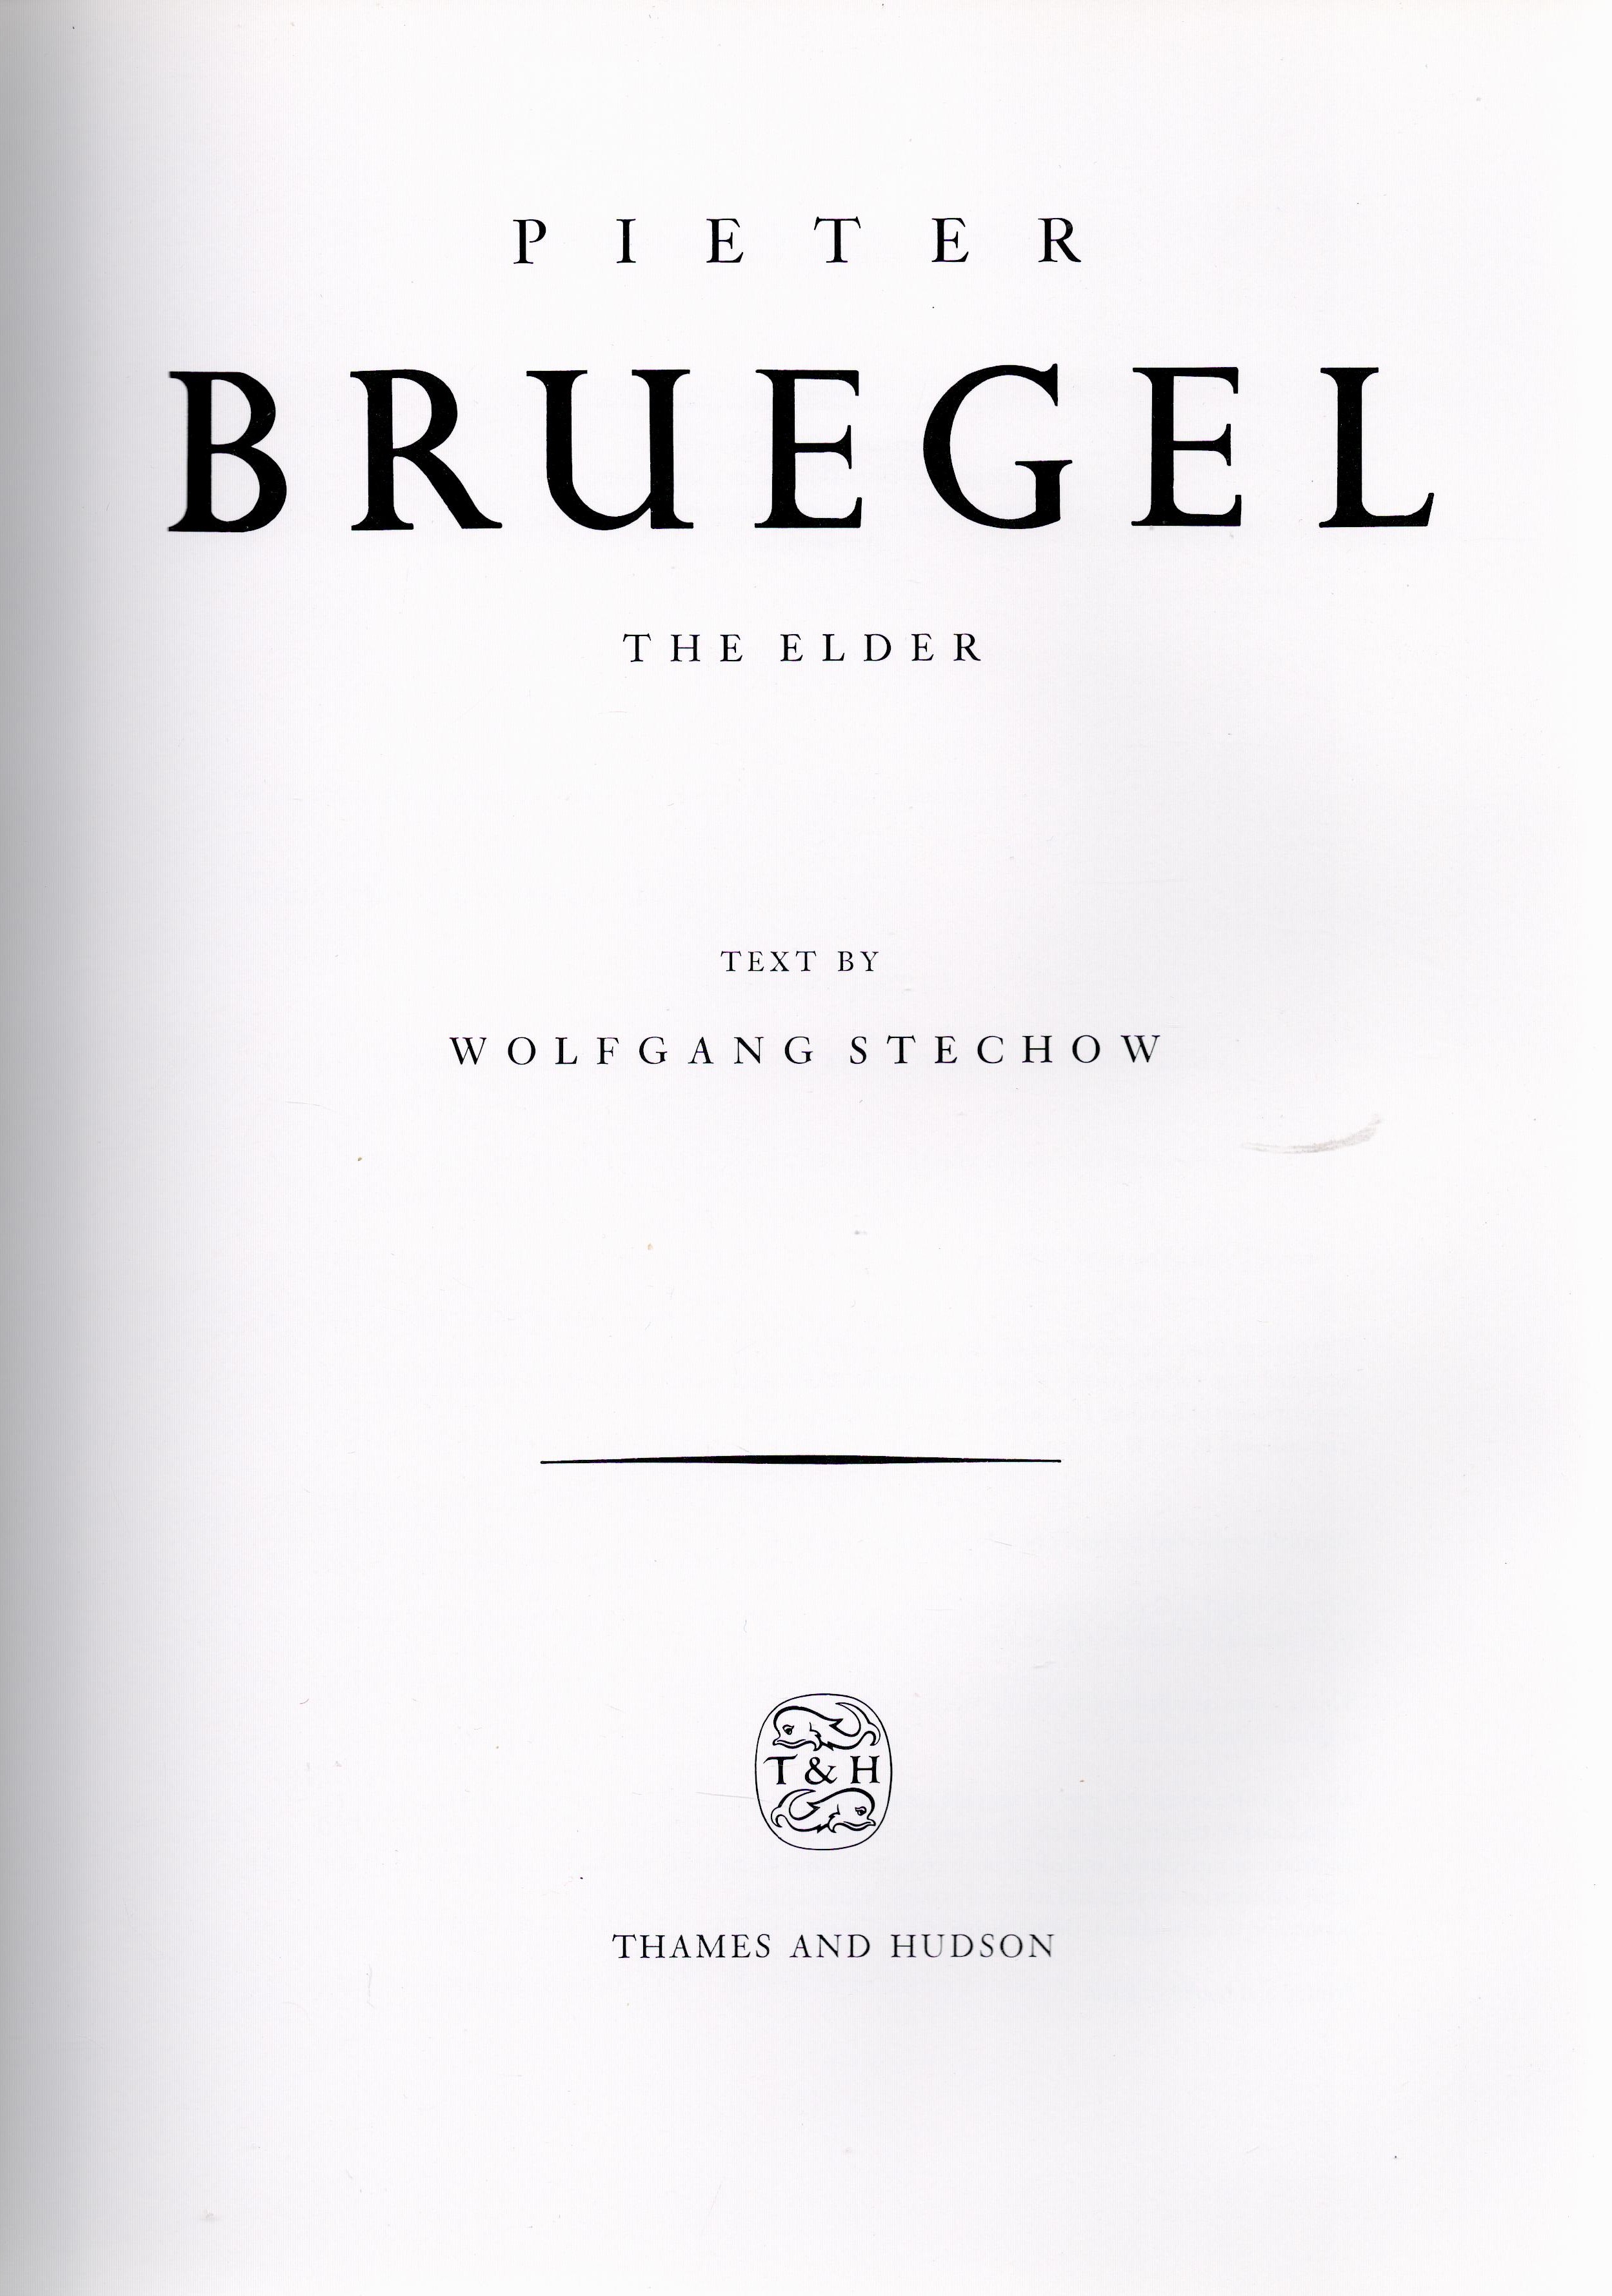 Pieter Bruegel The Elder by Wolfgang Stechow Hardback Book 1990 First UK Edition published by Thames - Image 2 of 3